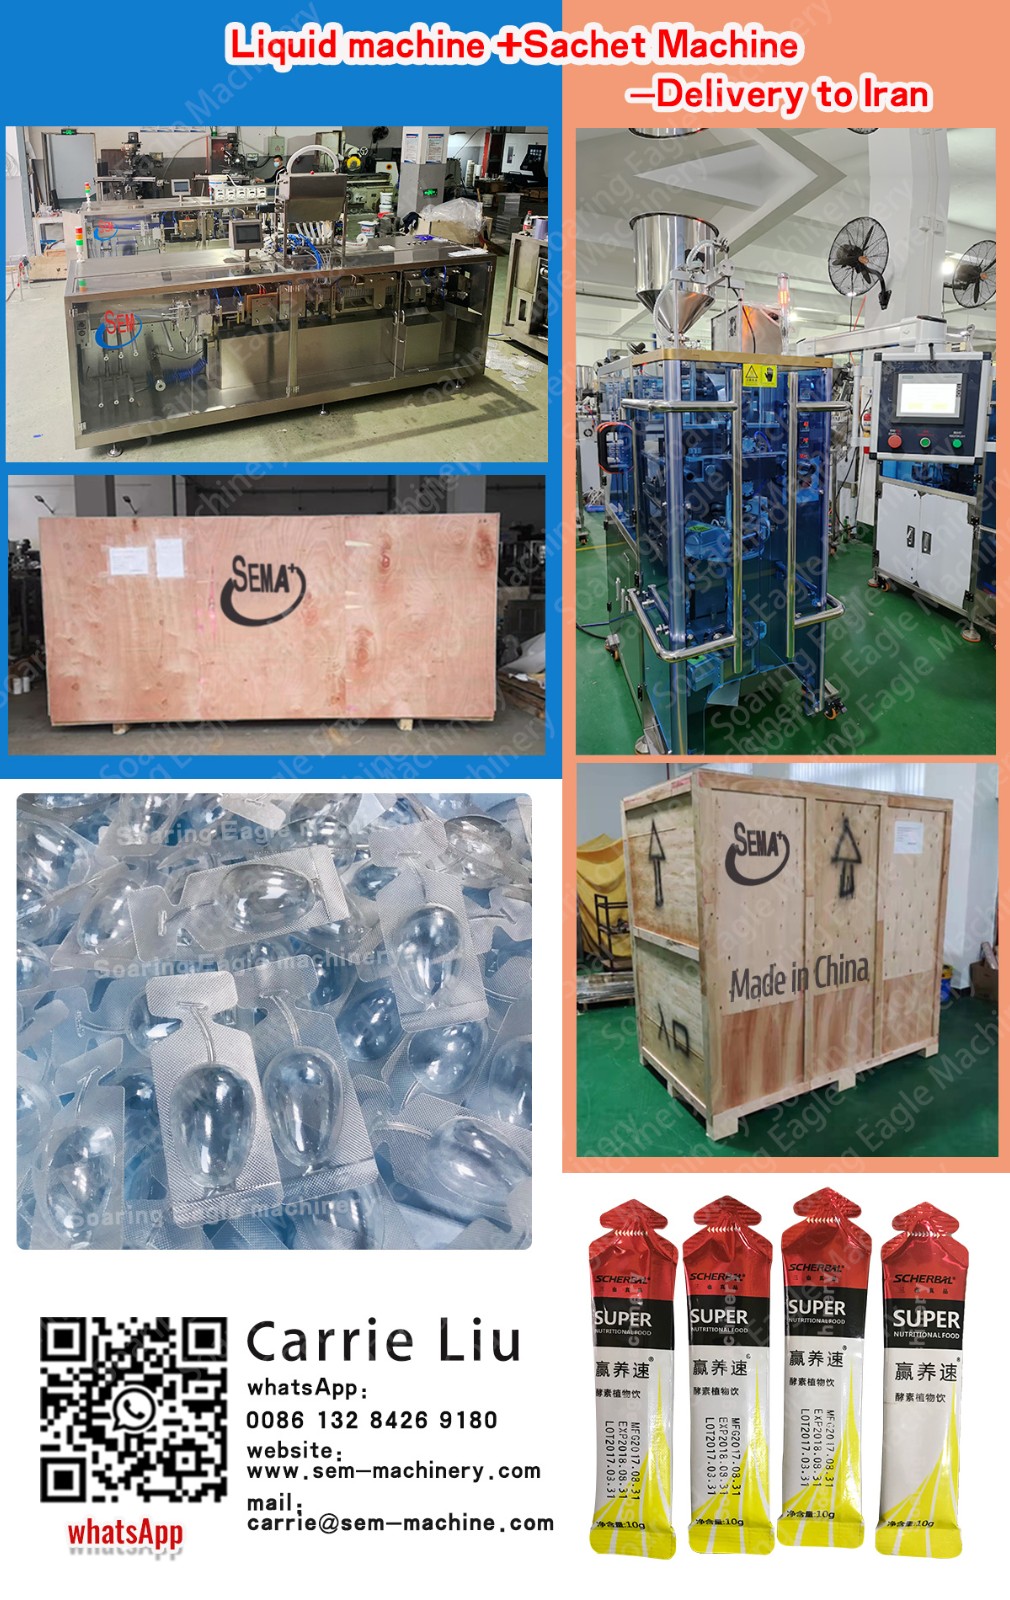 Show the details of our samples and the video of the equipment running in the factory, follow us and continue to update。